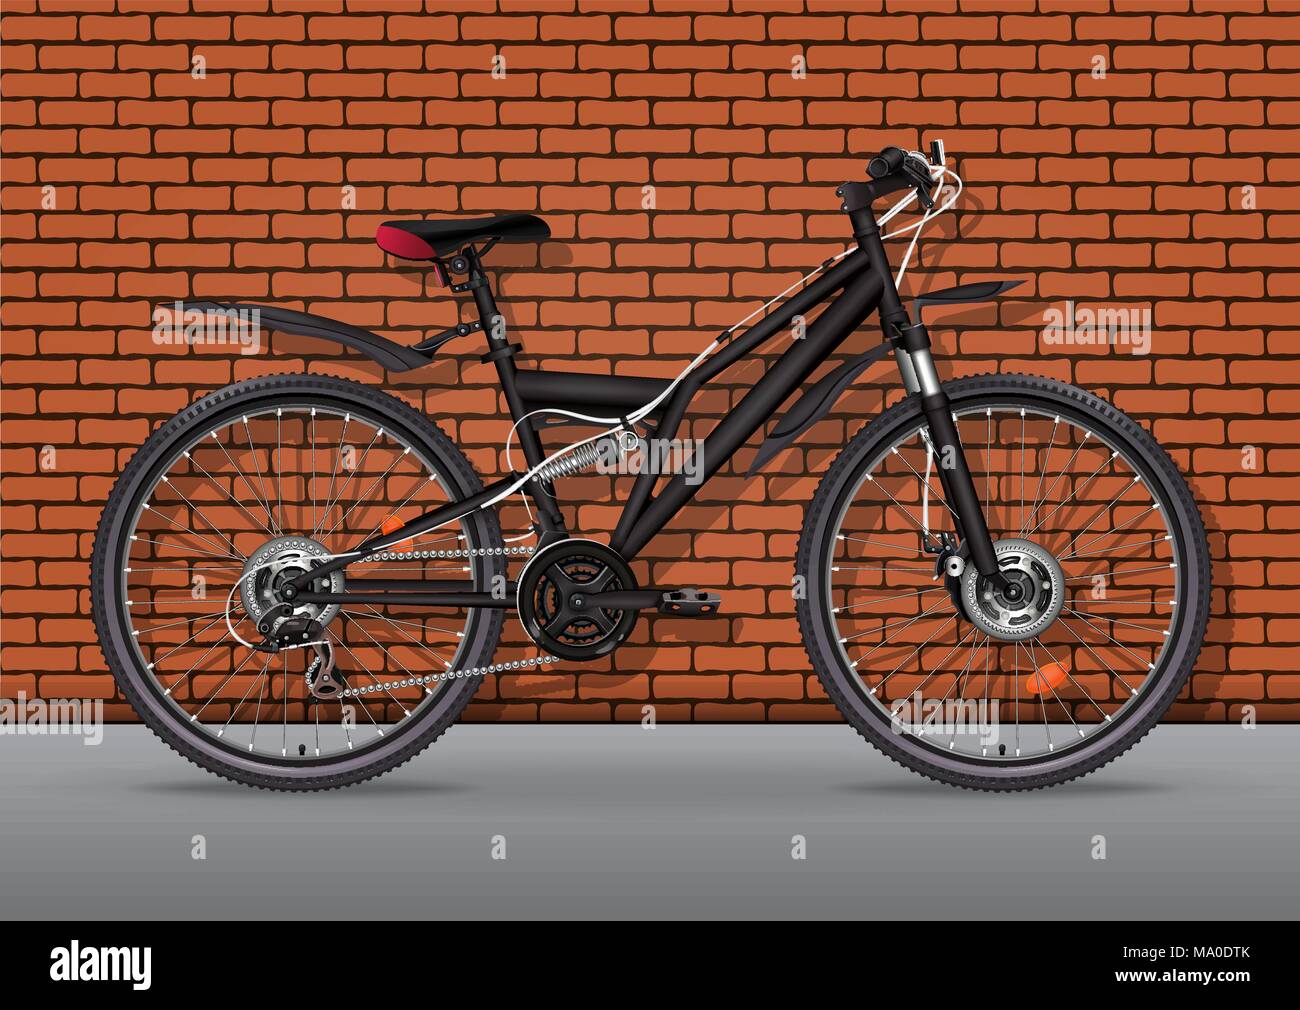 Bicycle vector realistic illustration. Black metallic bike half-face with many multiple detail standing on asphalt against a brick wall background, 3D Stock Vector